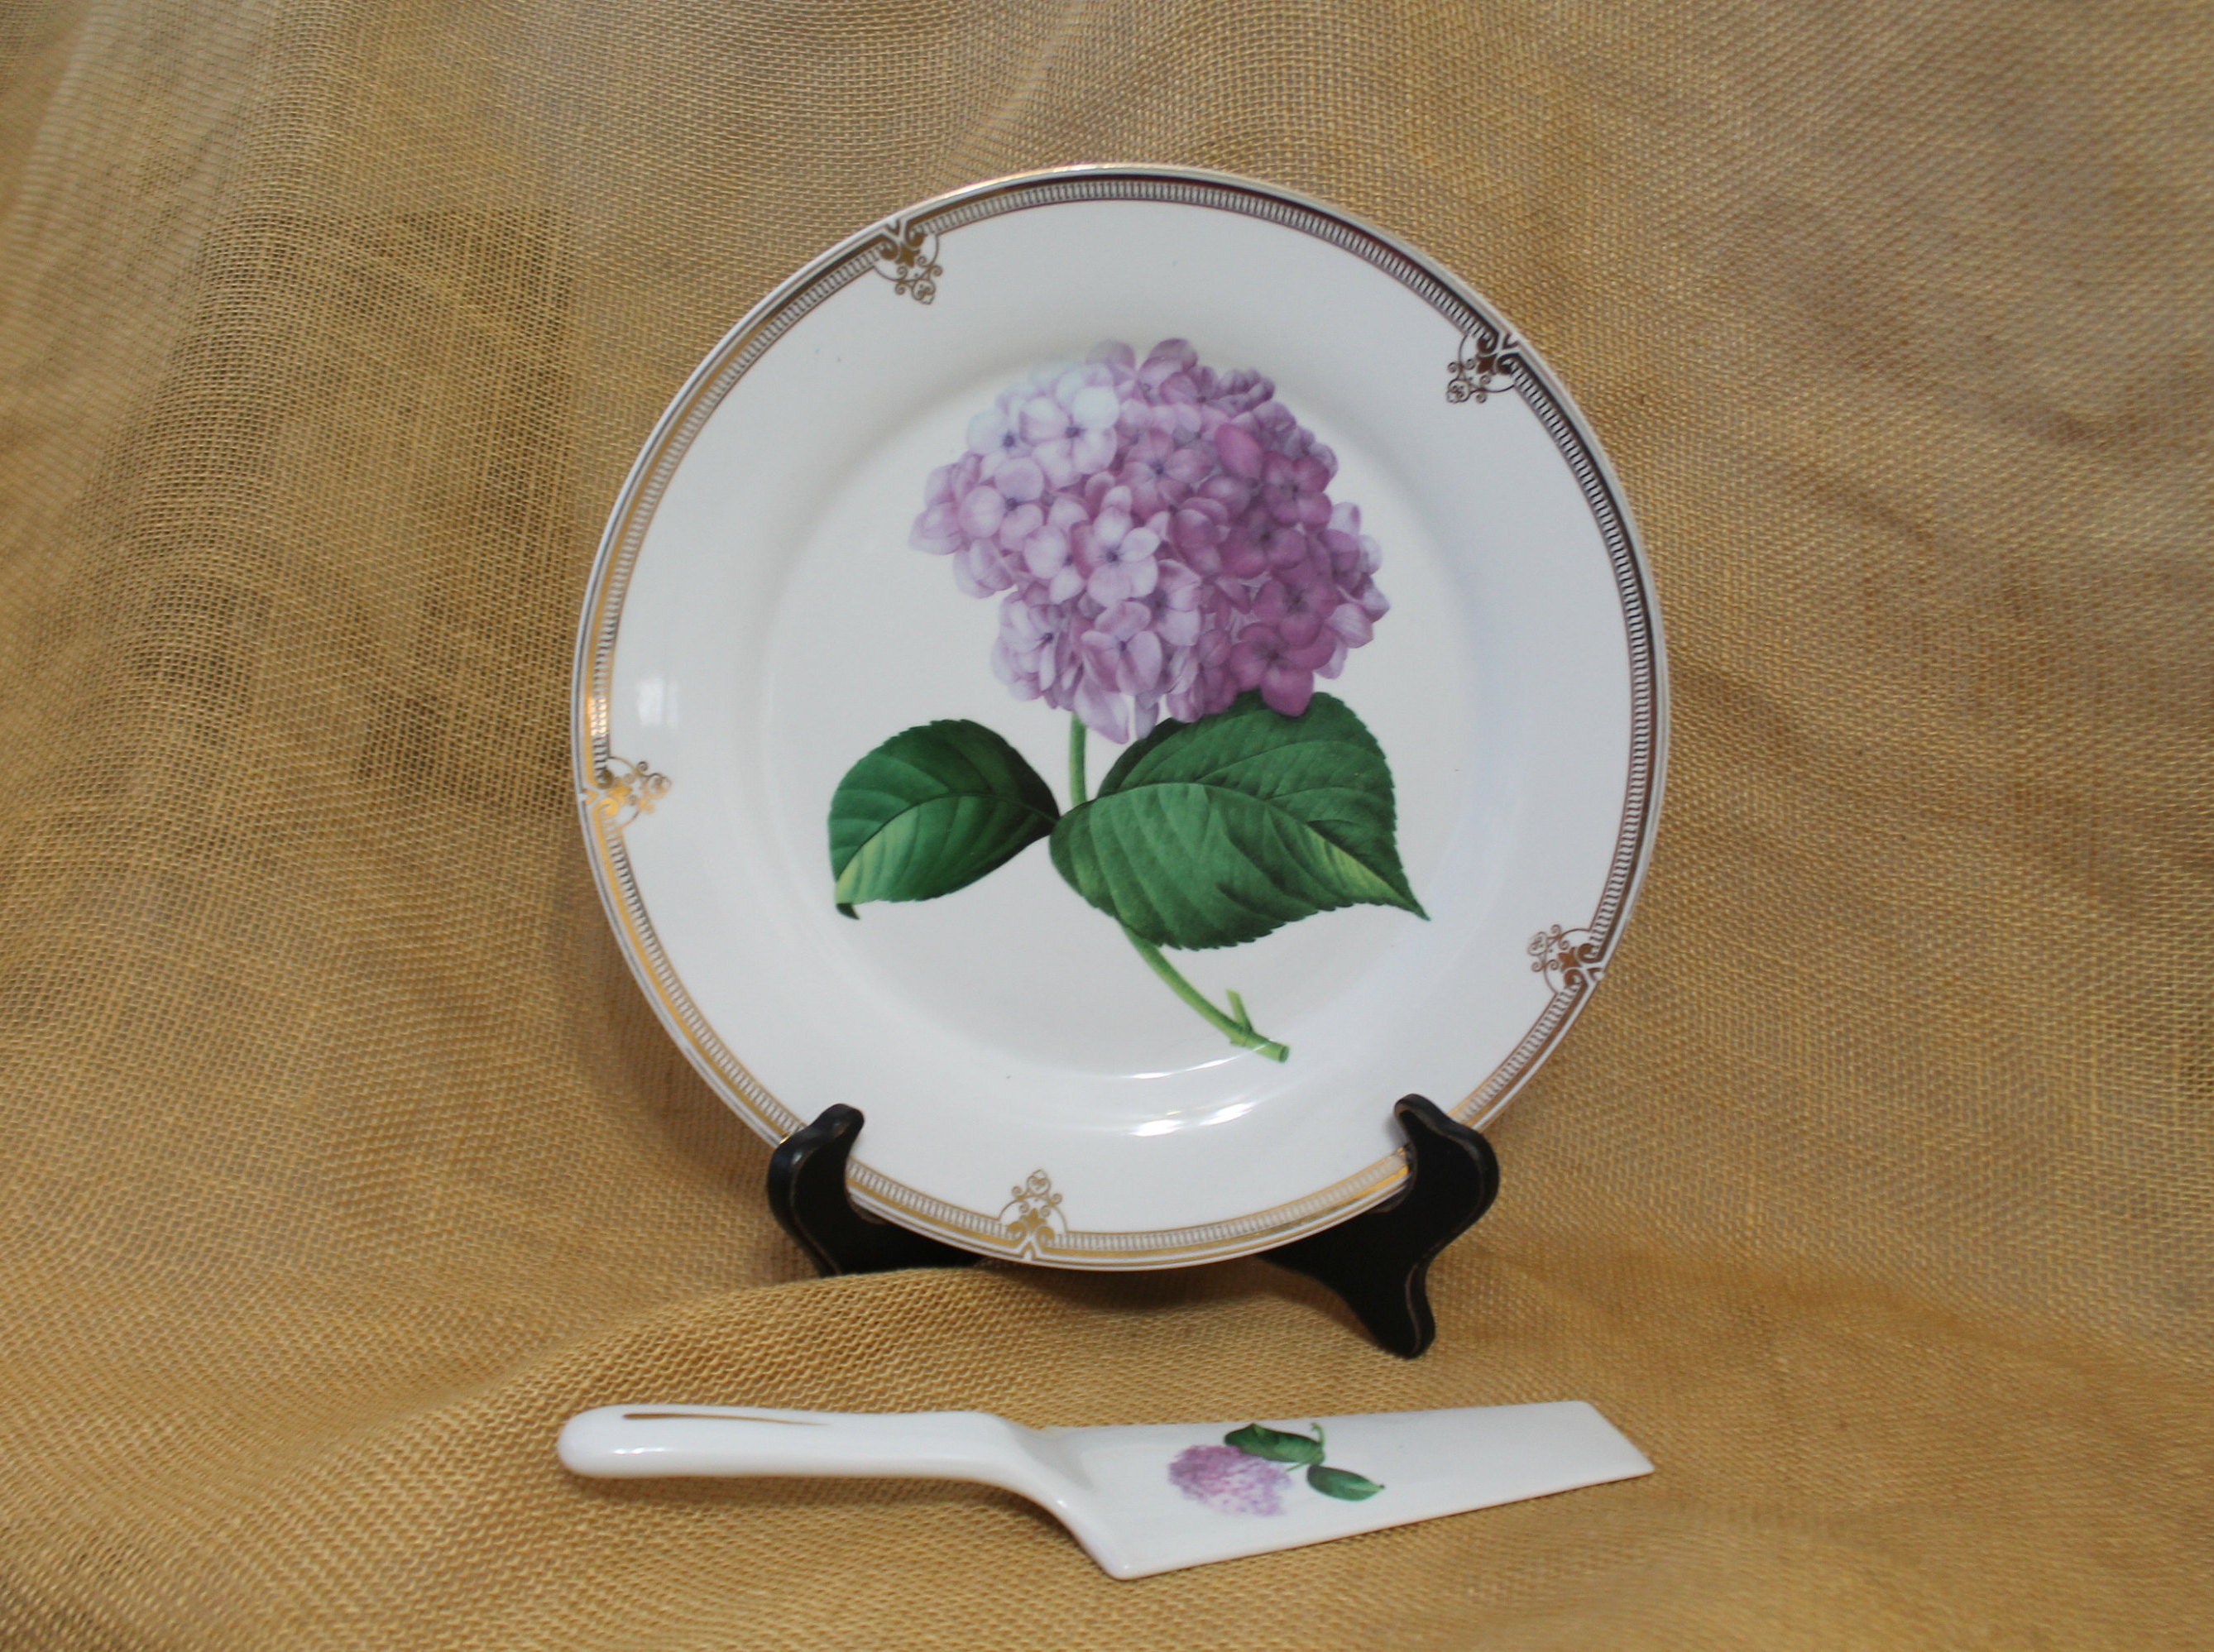 Madison and Max at Home Hydrangea Design Matching Server Porcelain China Cake Plate Vintage Detailed Gold Trim